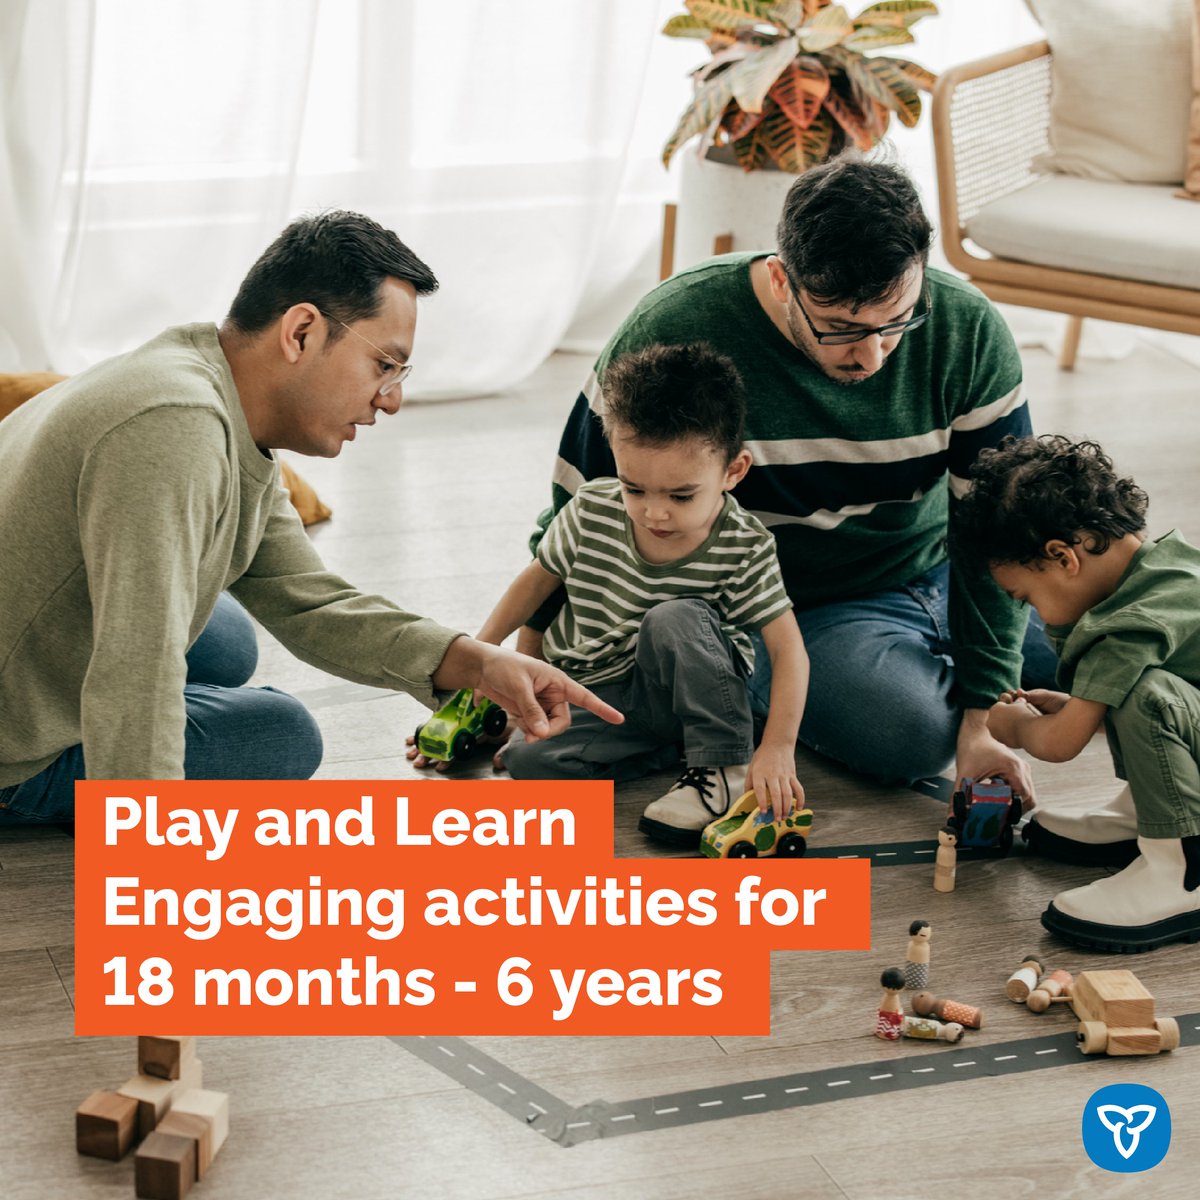 Naming objects and organizing them is a fun and easy way to build your toddler’s vocabulary.

You can ask questions like:
'What is it?'
'What does it do?'

#PlayandLearn today!
playandlearn.healthhq.ca/en/toddlers/la…